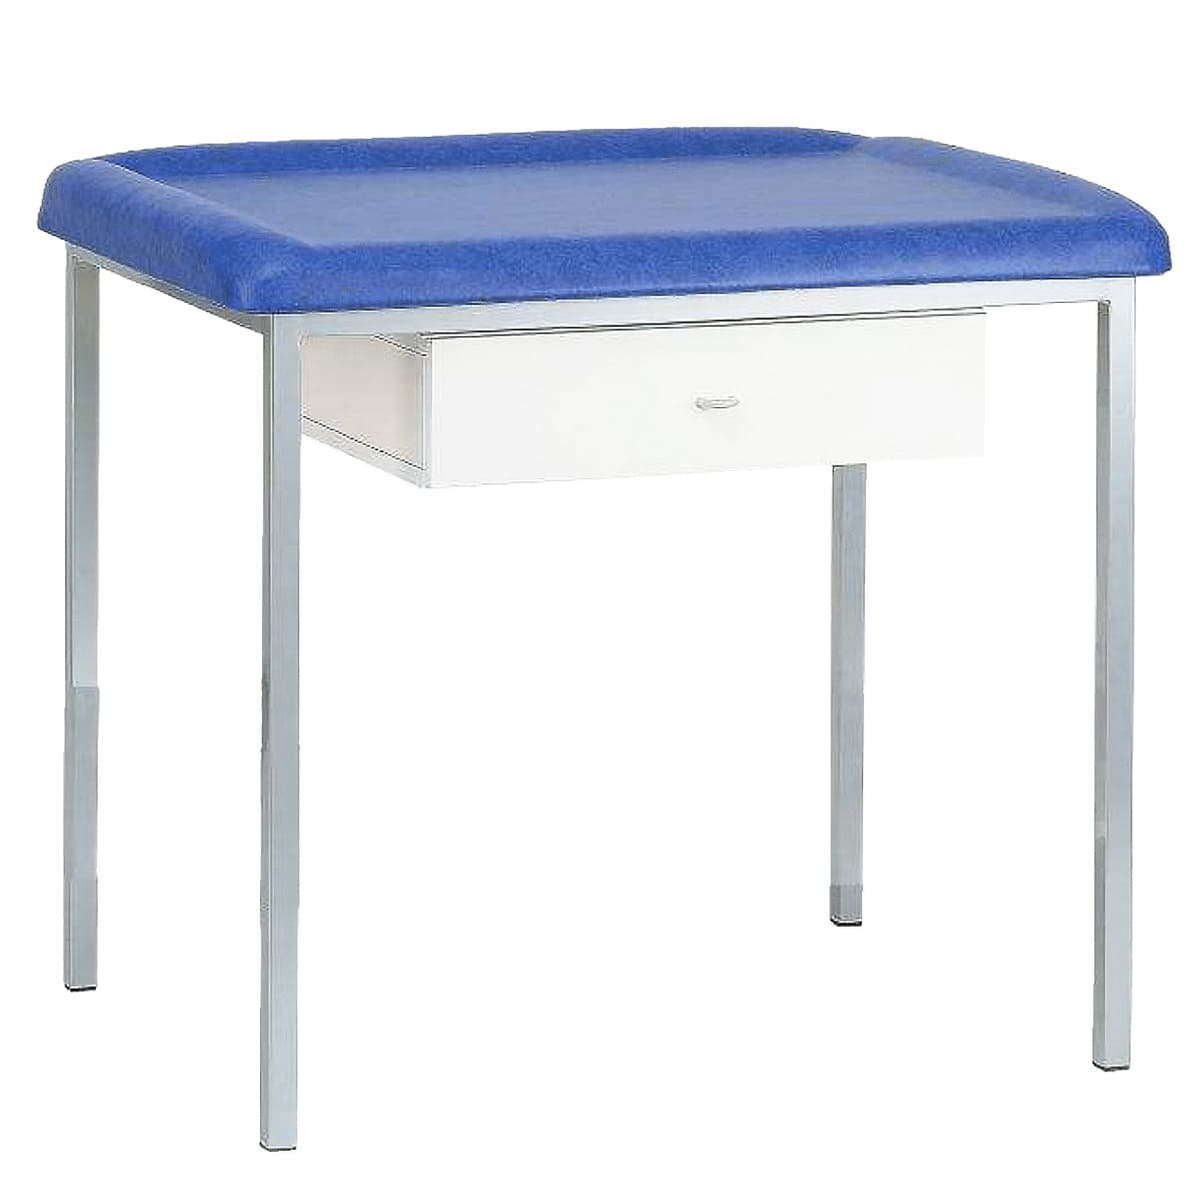 Pediatric table height 86cm, 1 section, with drawer